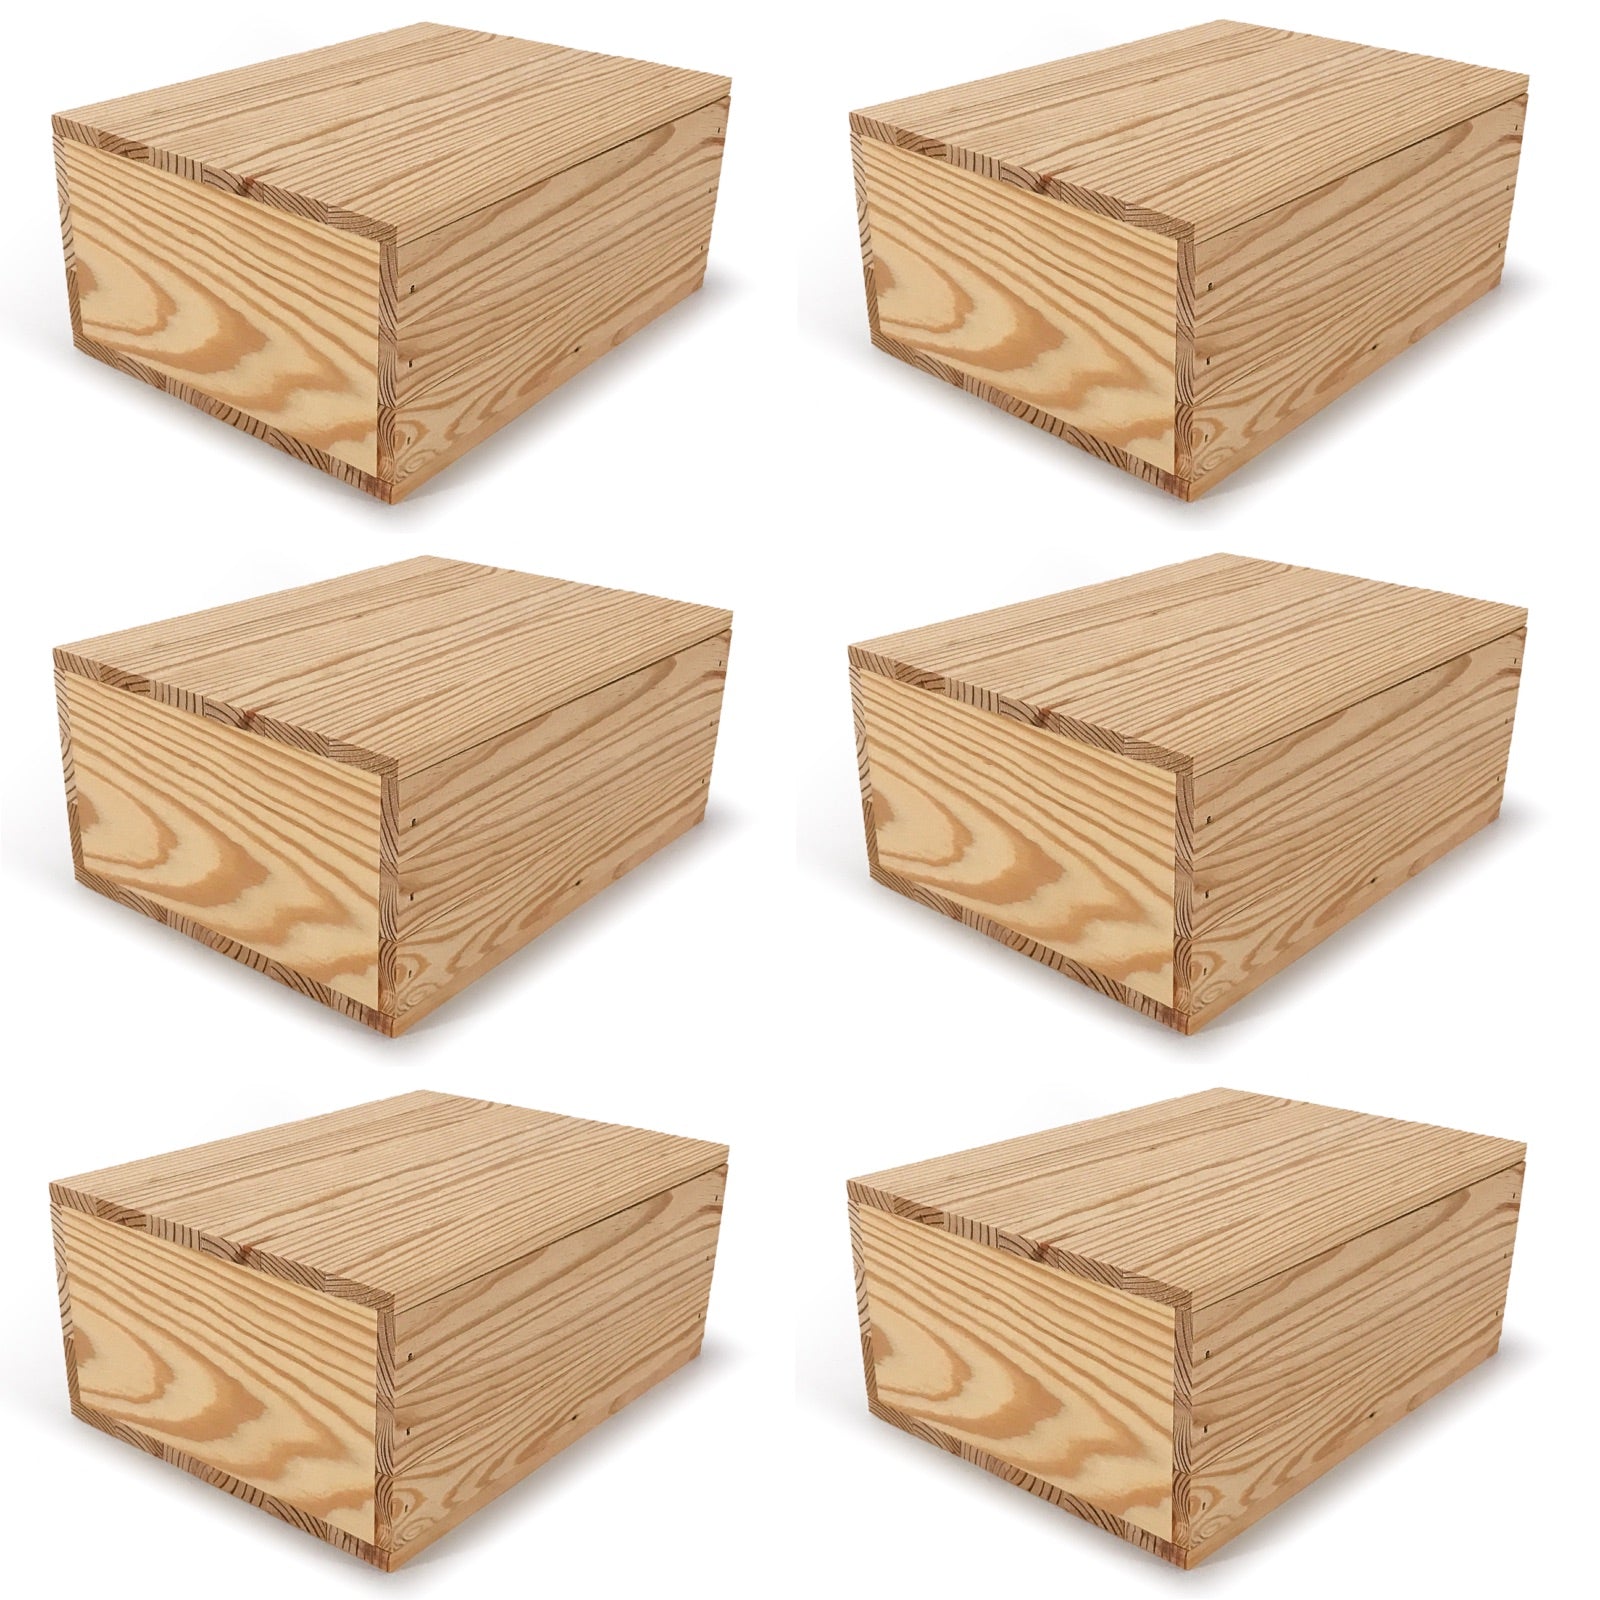 6 Small wooden crates with lid 10x8x4.25